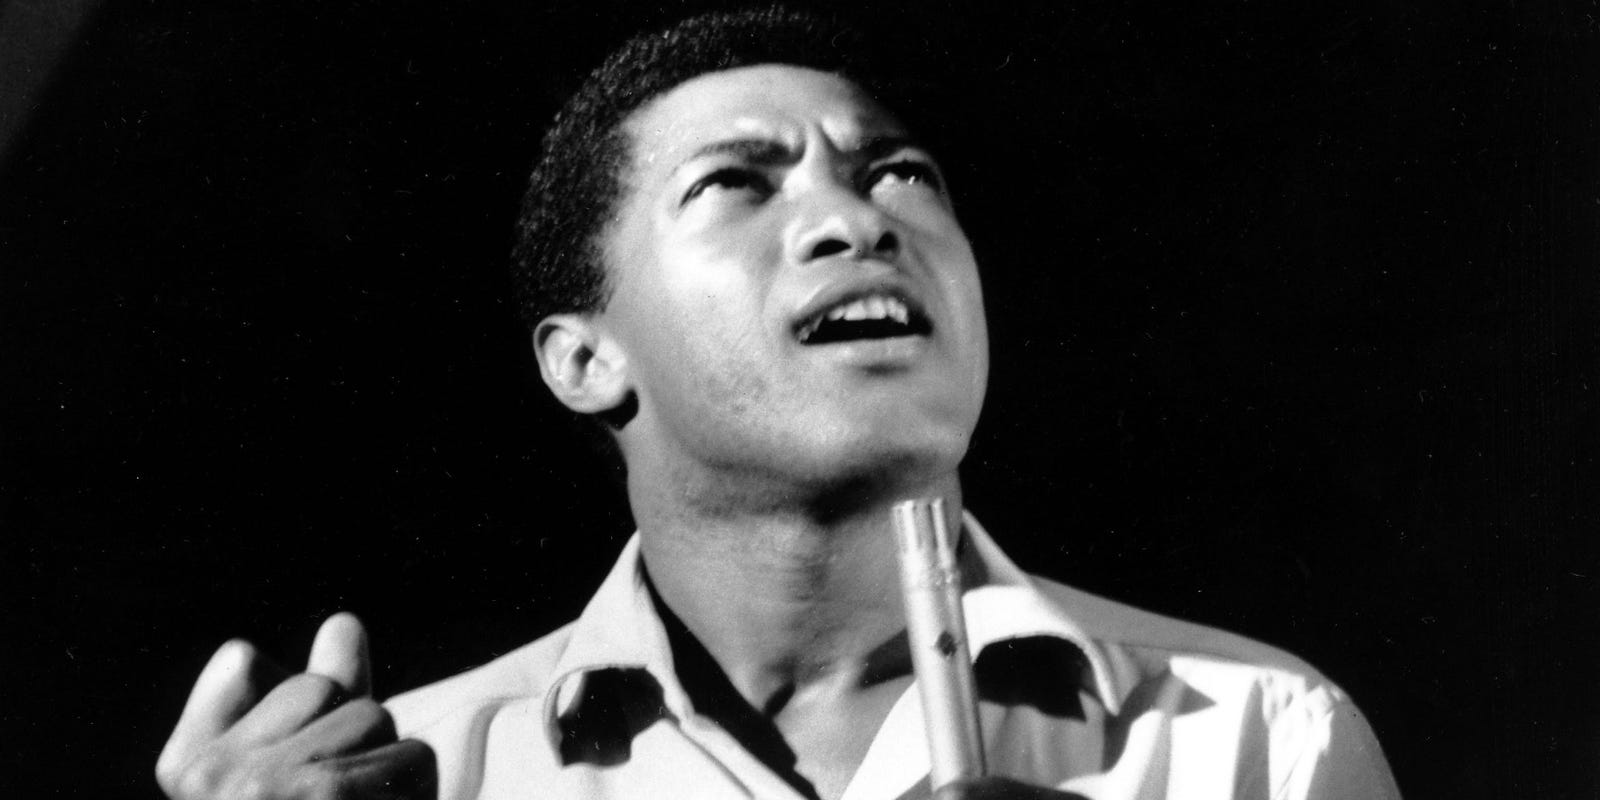 A Change is Come': How Dylan Sam Cooke anthem